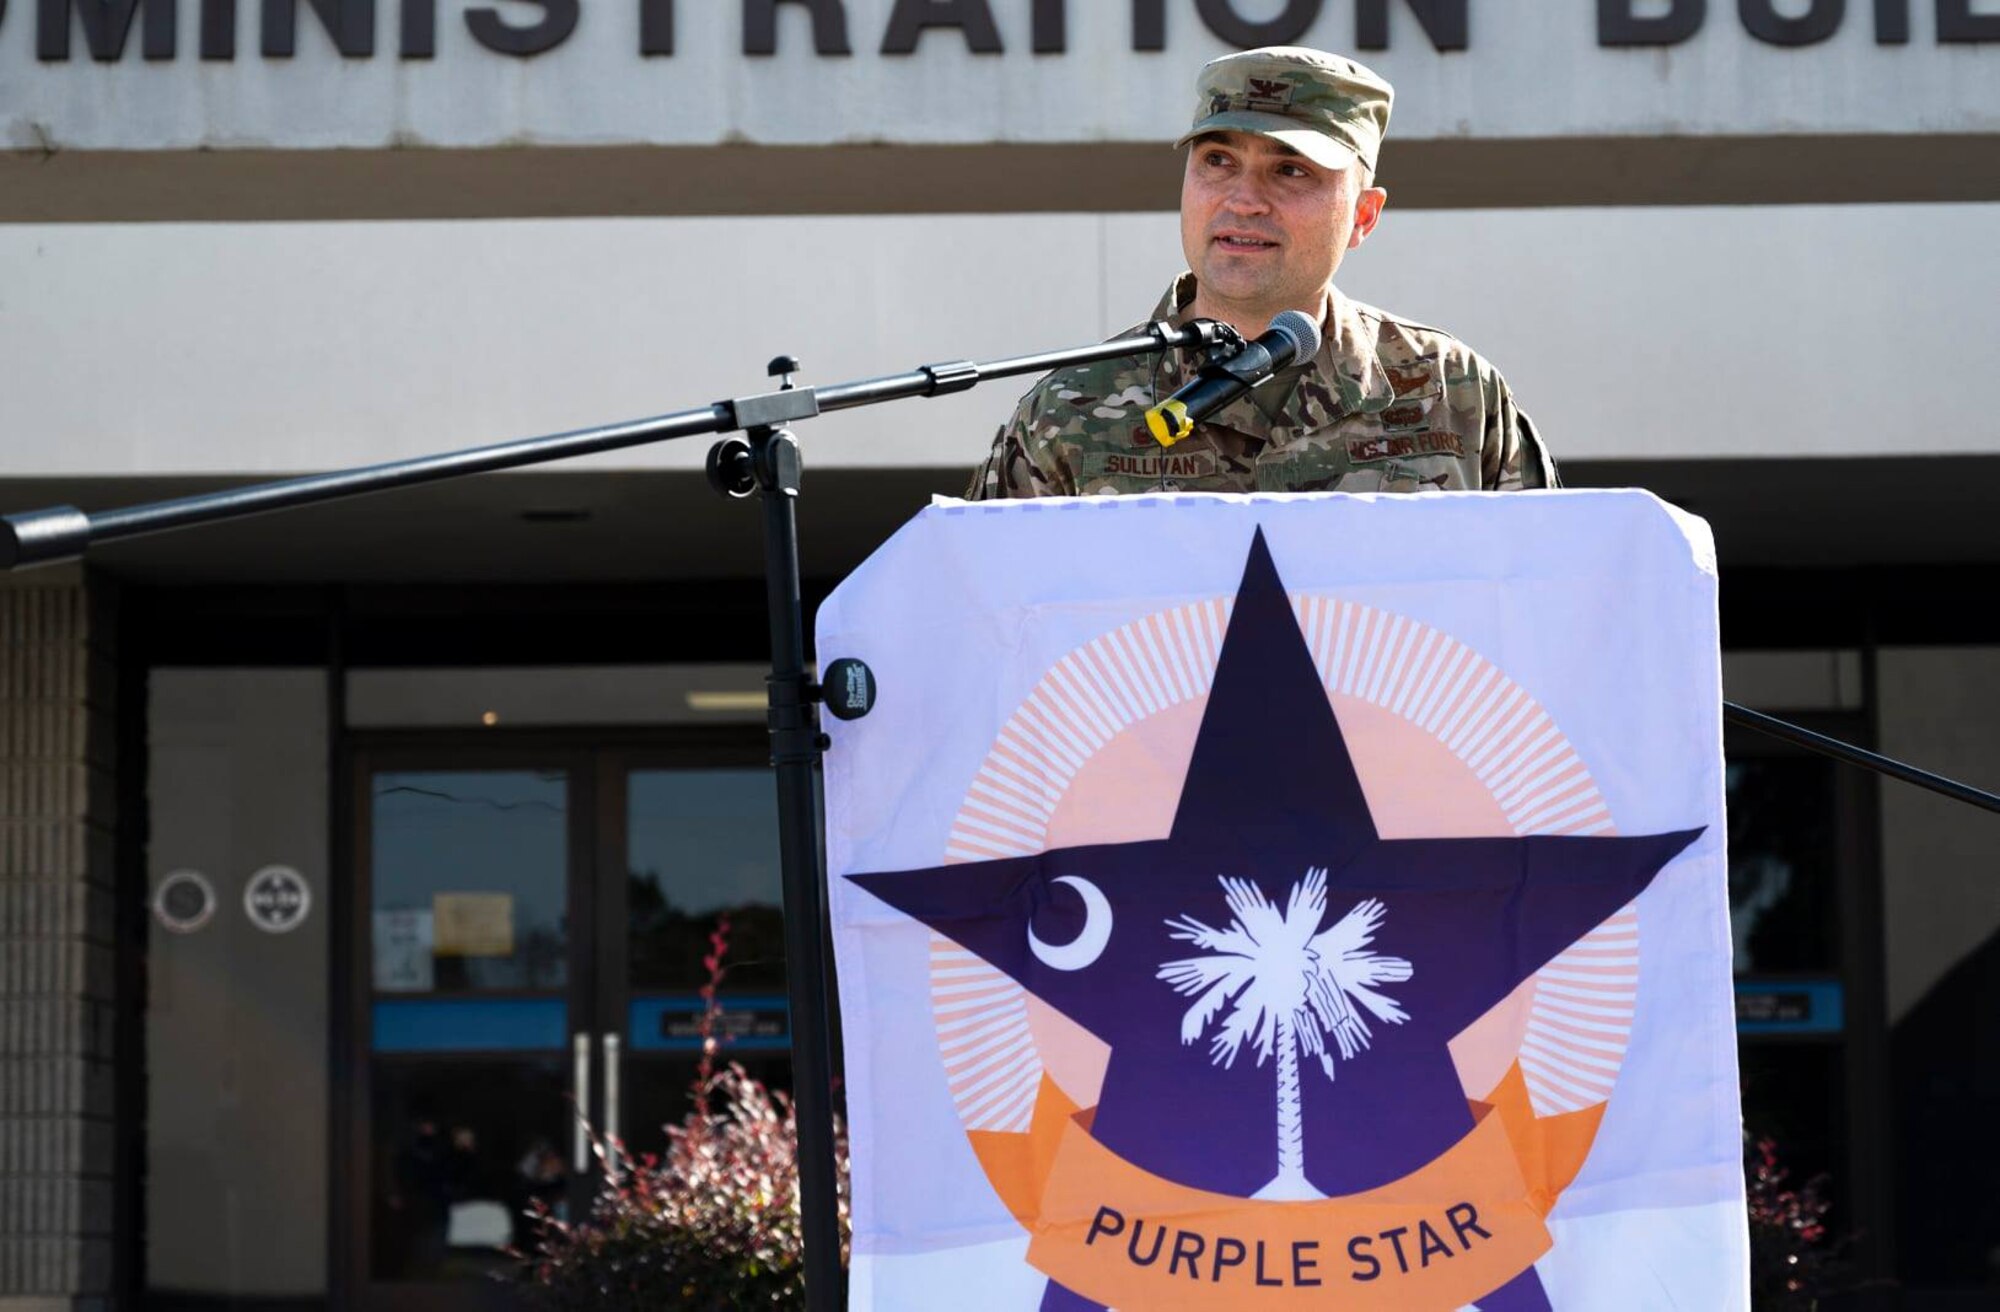 A photo of an Airman speaking at a podium.